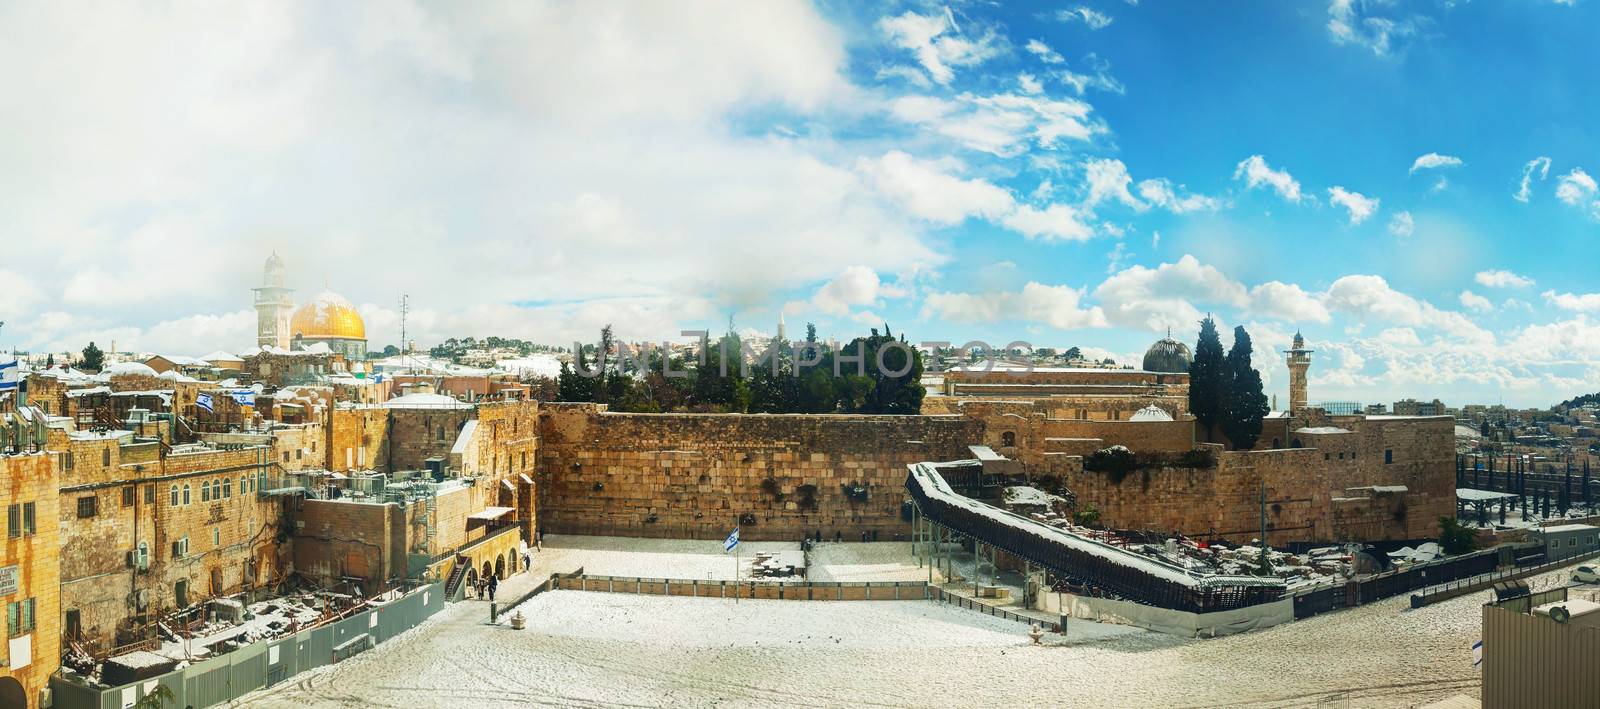 The Western Wall in Jerusalem, Israel om a sunny day after a snow storm